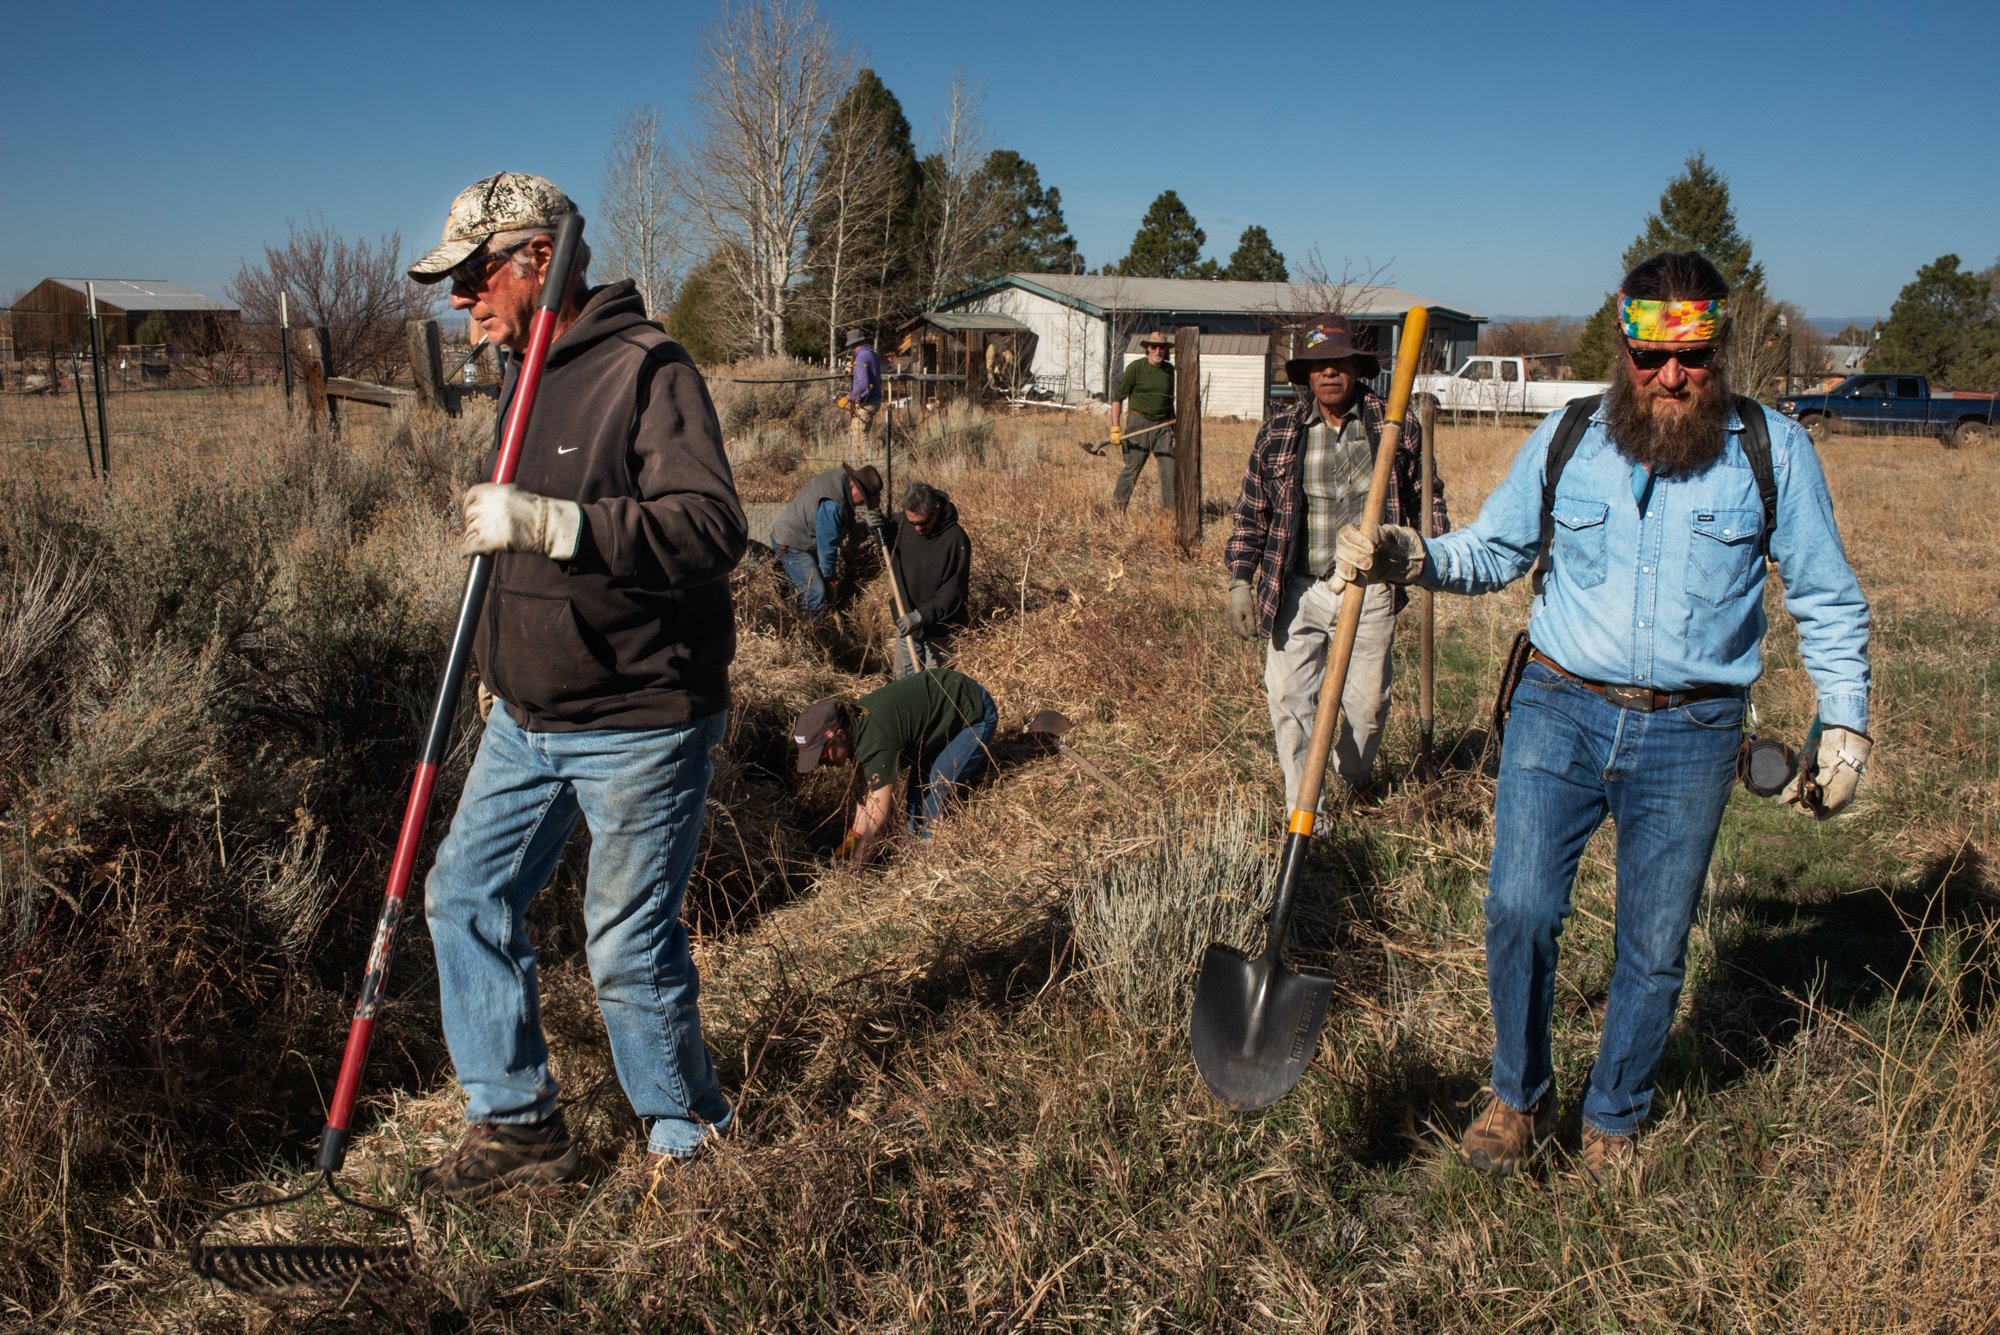   Local members of Rio Lucero y Arroyo Seco Acequia Association work together in the annual spring-time clearing effort. President Brian Duran is seen on the right with shovel in hand.  